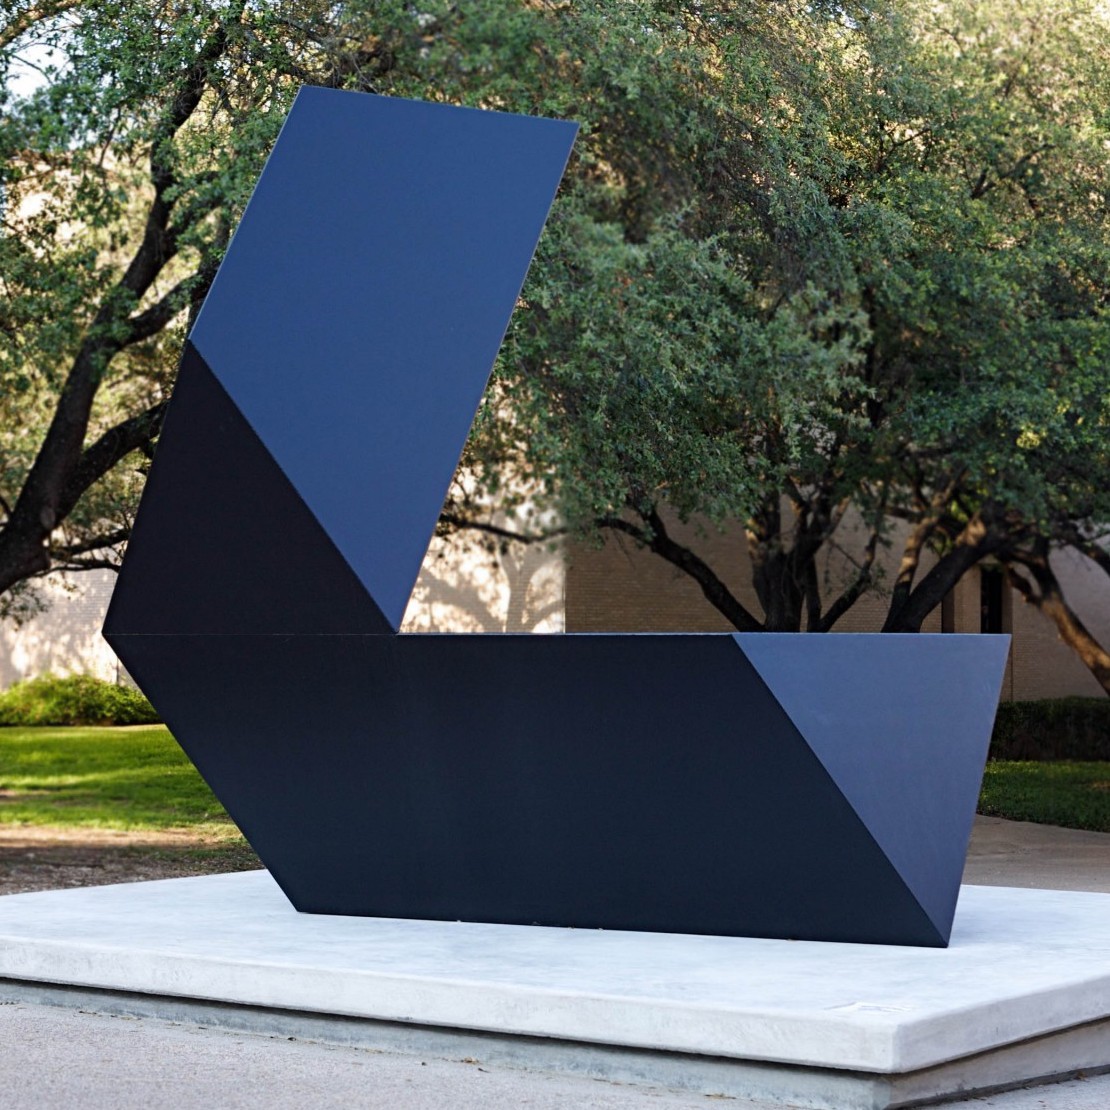 A deep black sculpture composed of elongated, triangular sections. In this view the sculpture forms an 